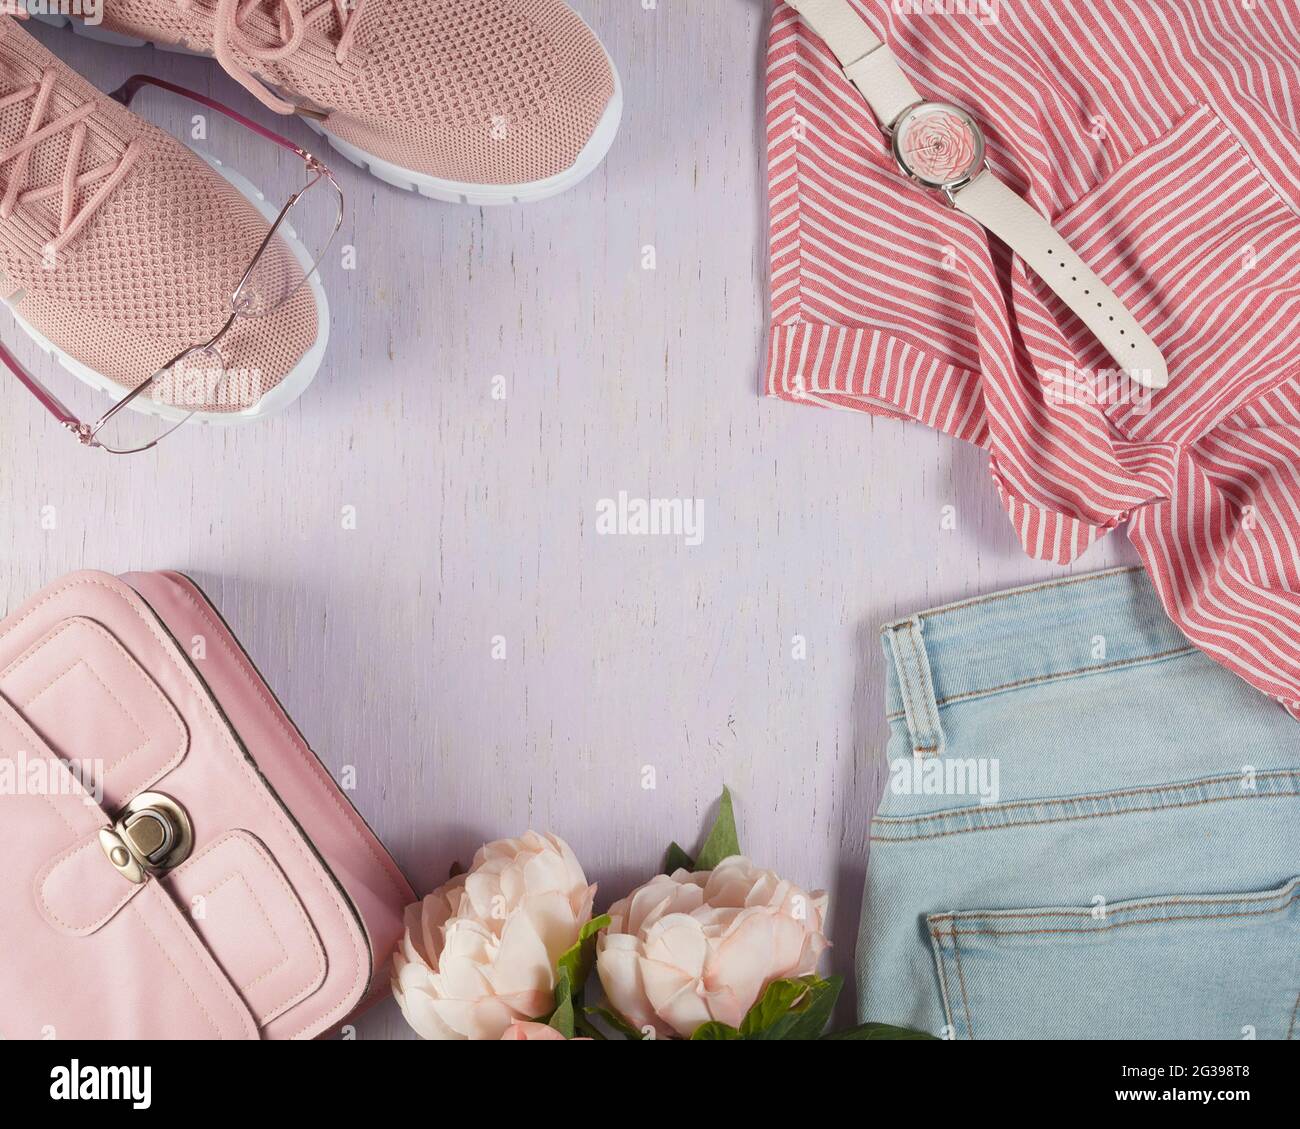 Things are laid out on a lilac, wooden background. Small pink handbag ...